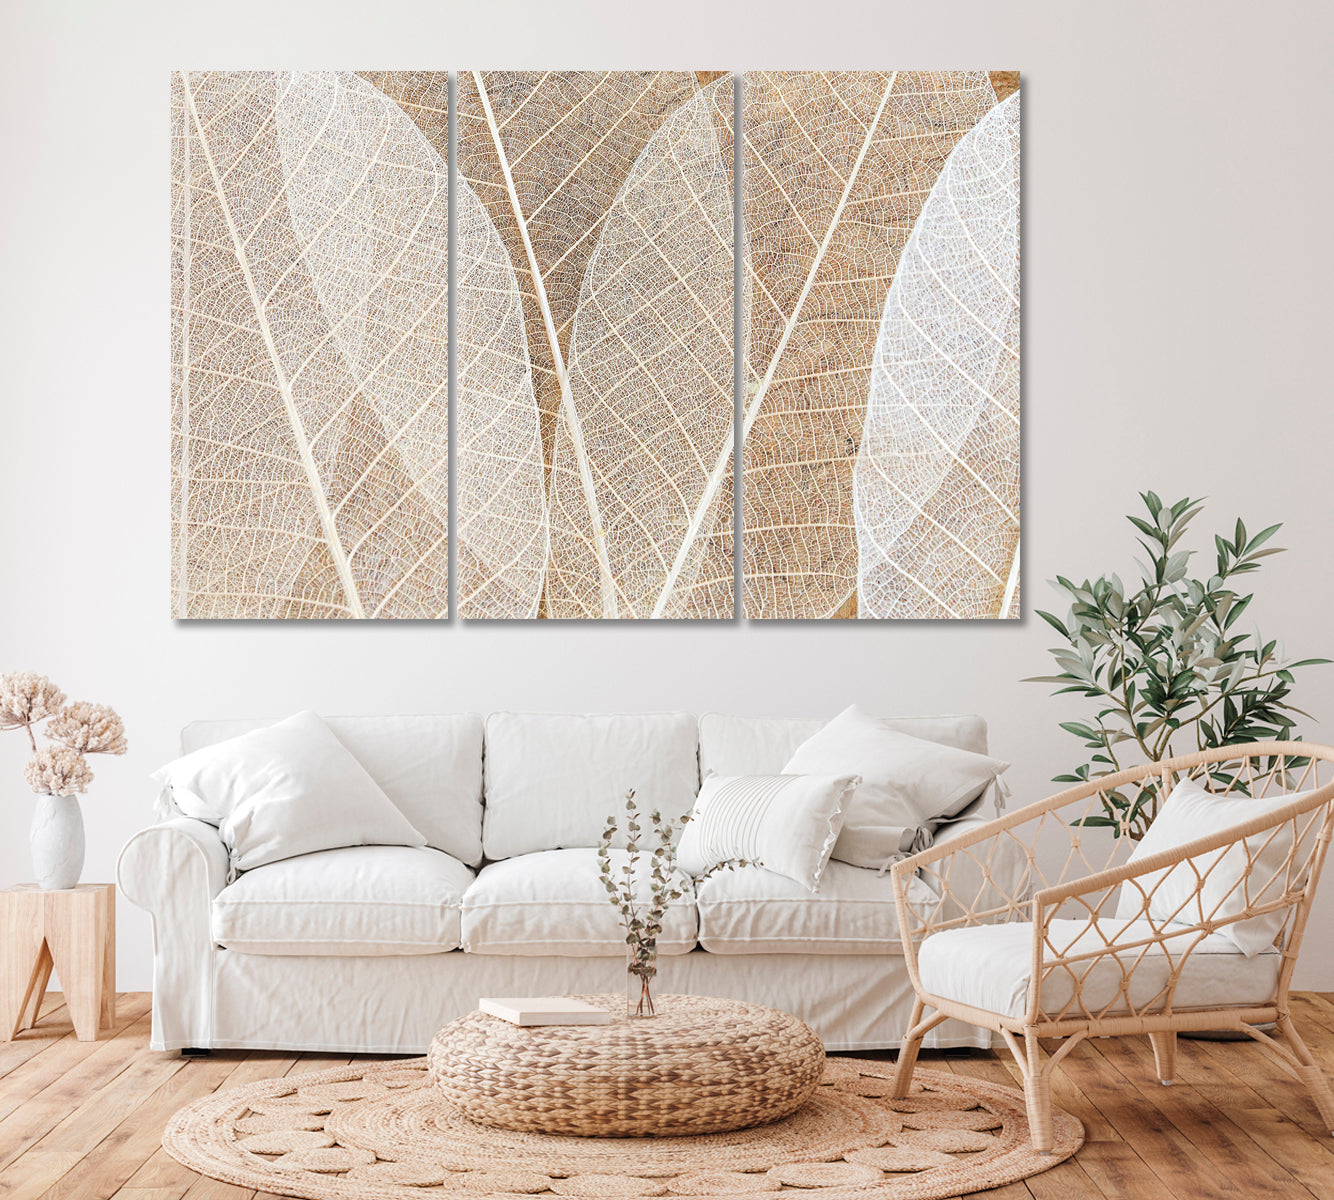 Dried Leaves Close Up Canvas Print ArtLexy 3 Panels 36"x24" inches 